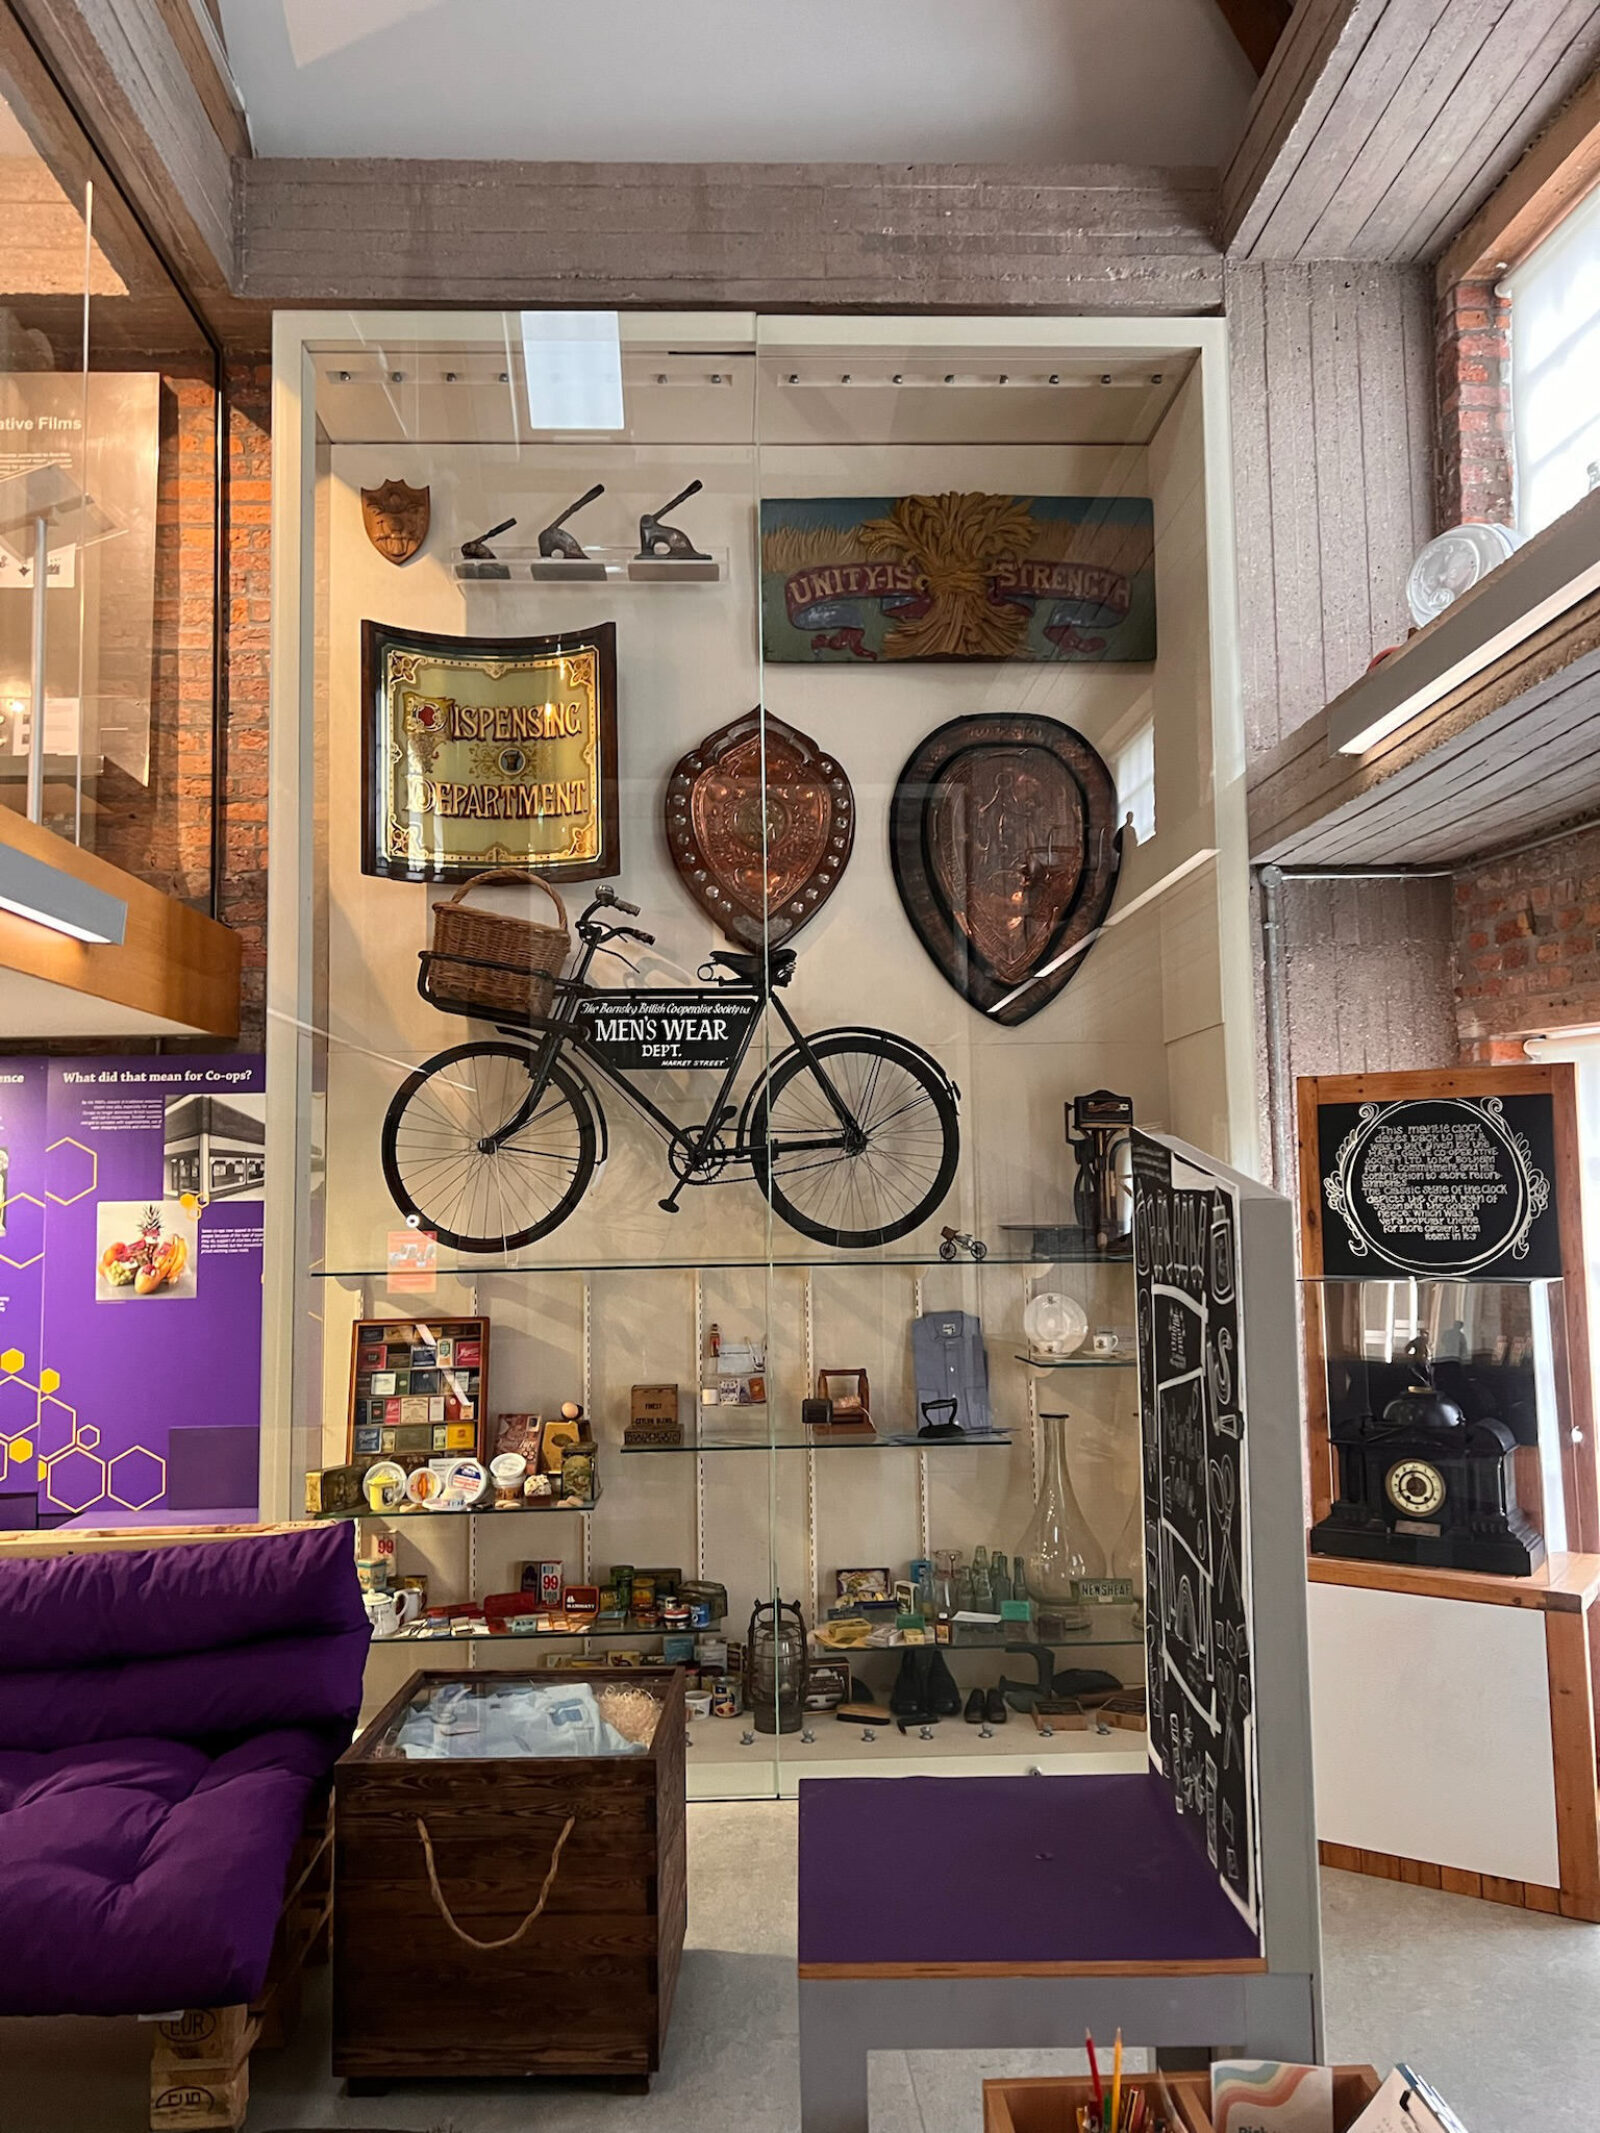 A photo of a large display of objects in the Pioneers Museum in Rochdale, showcasing emblems, a bicycle and several household products